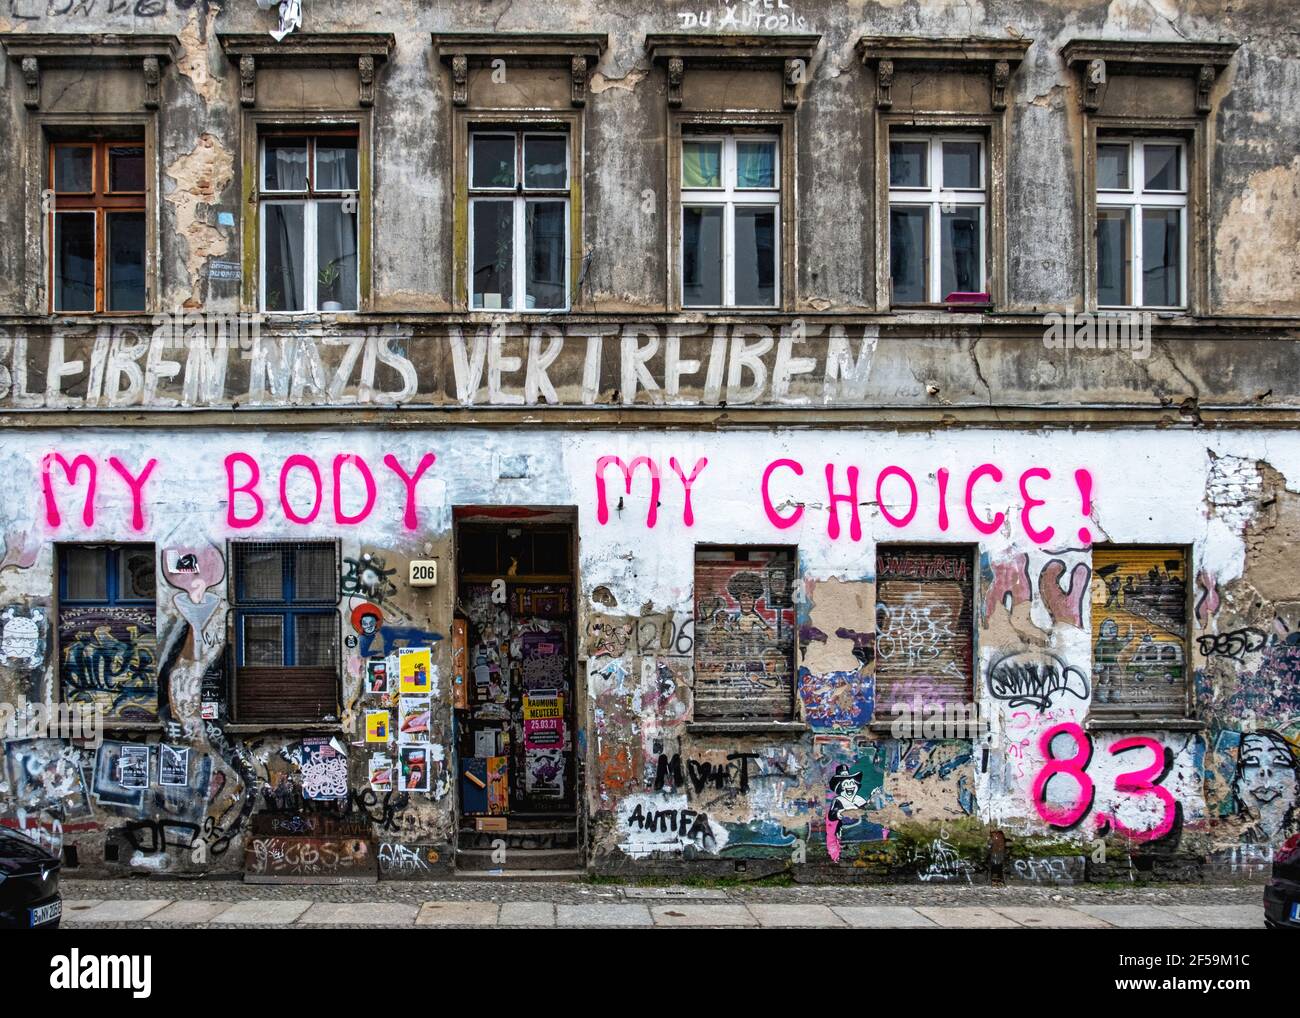 .Old squat building detail, weathered wall, graffiti, urban art, Linien strasse 206, Mitte, Berlin. My Body My choice 83 - political inscription Stock Photo